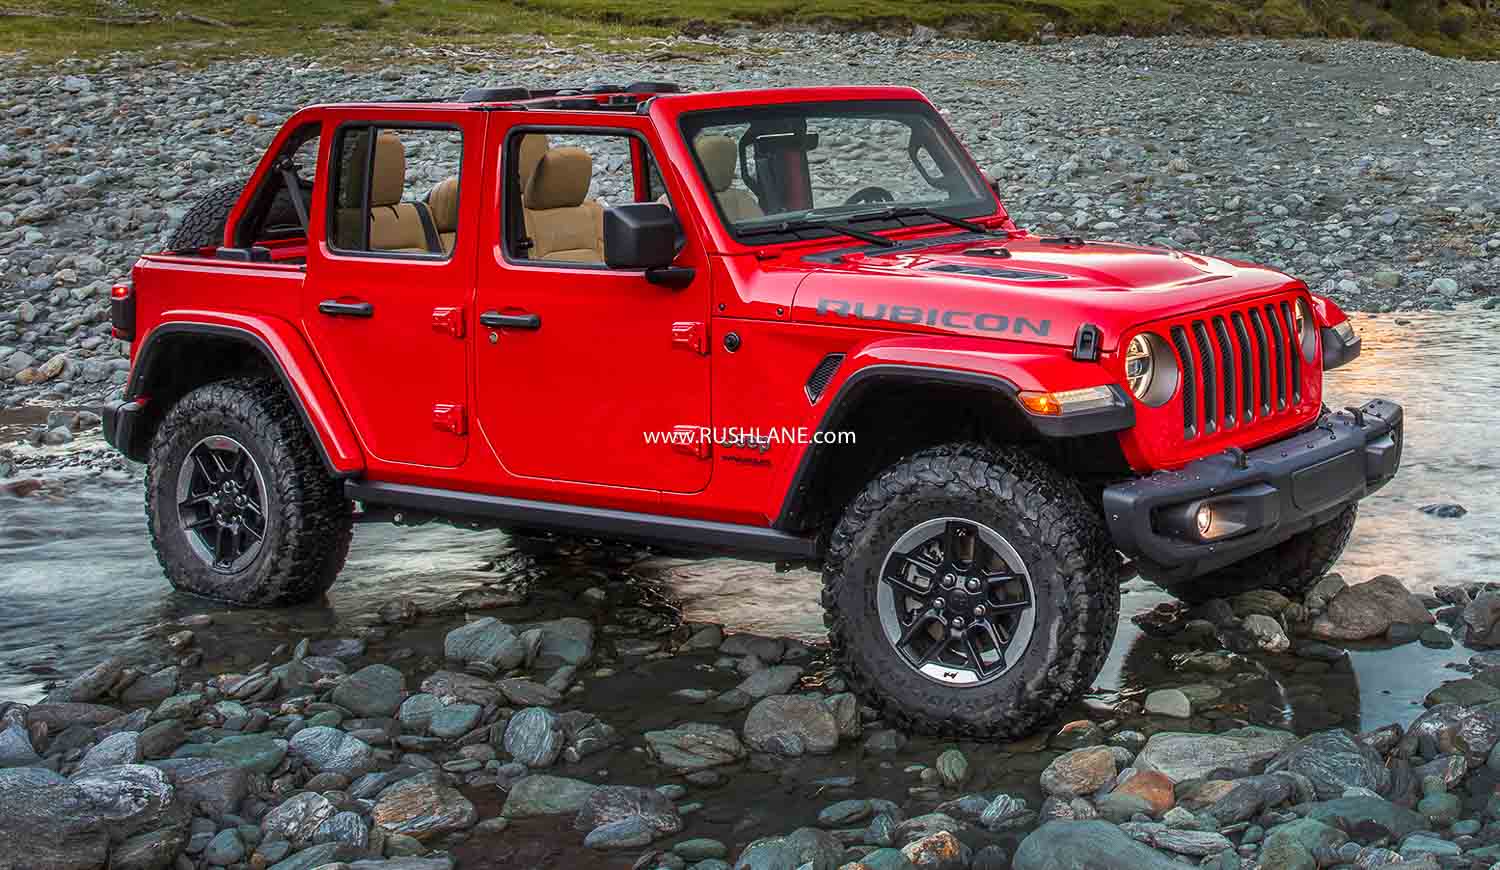 2020 Jeep Wrangler Rubicon SUV Launched in India